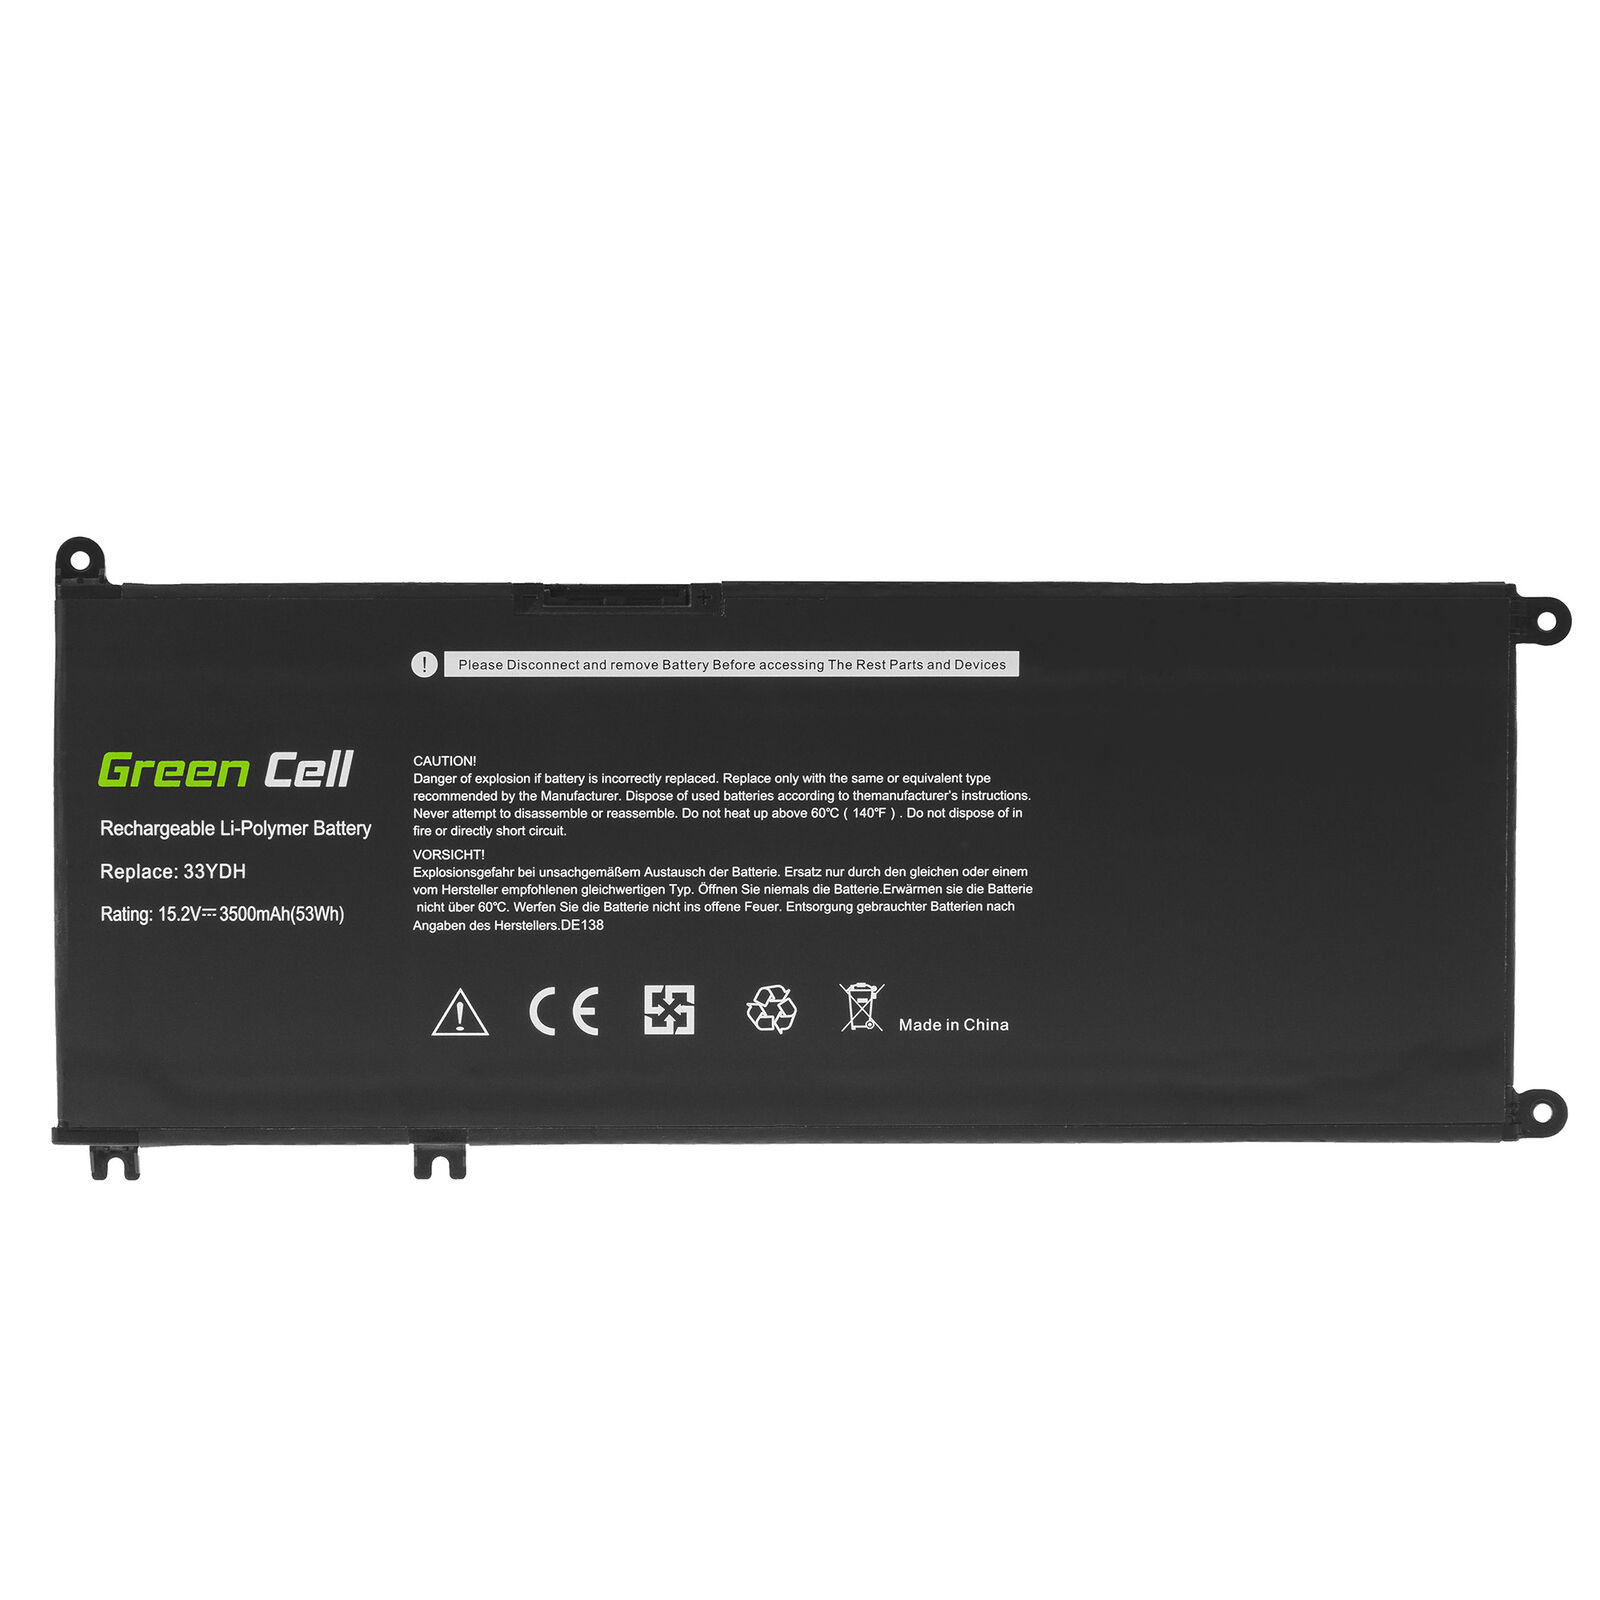 Dell 099NF2 33YDH 99NF2 compatible battery